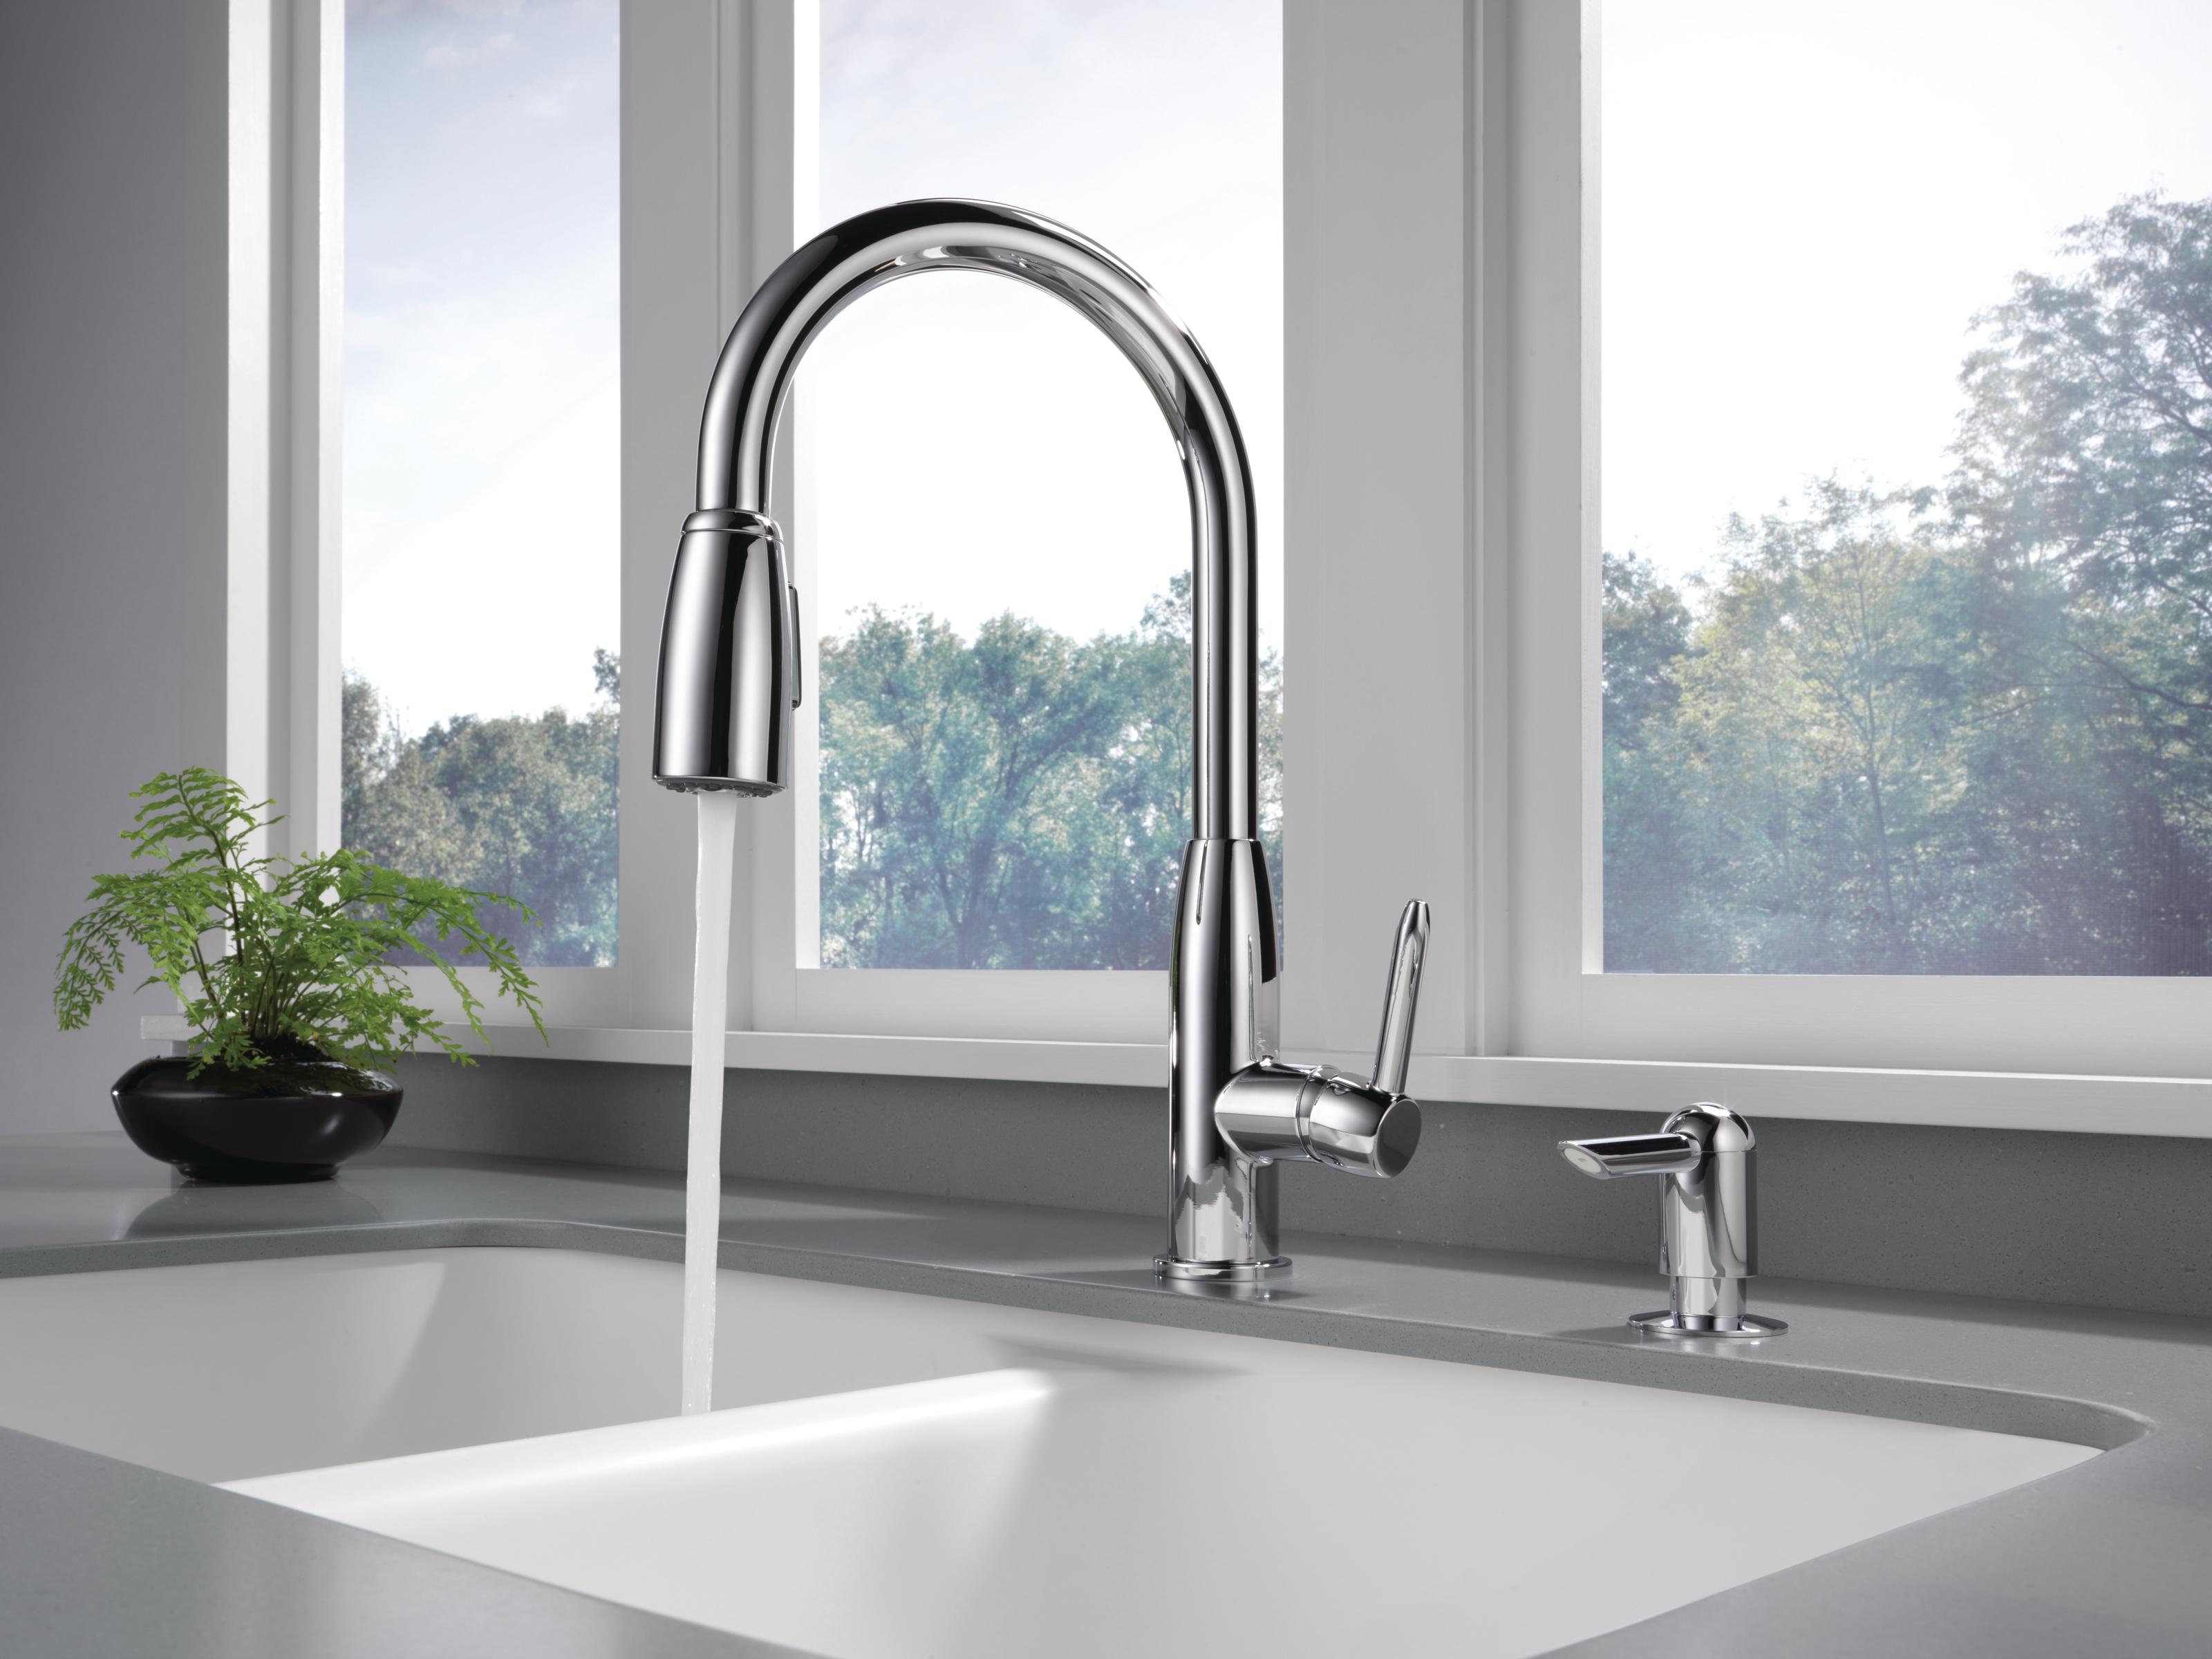 Peerless Core Kitchen Single Handle Pull-Down Faucet in Chrome P88103LF-SD-L - image 8 of 11